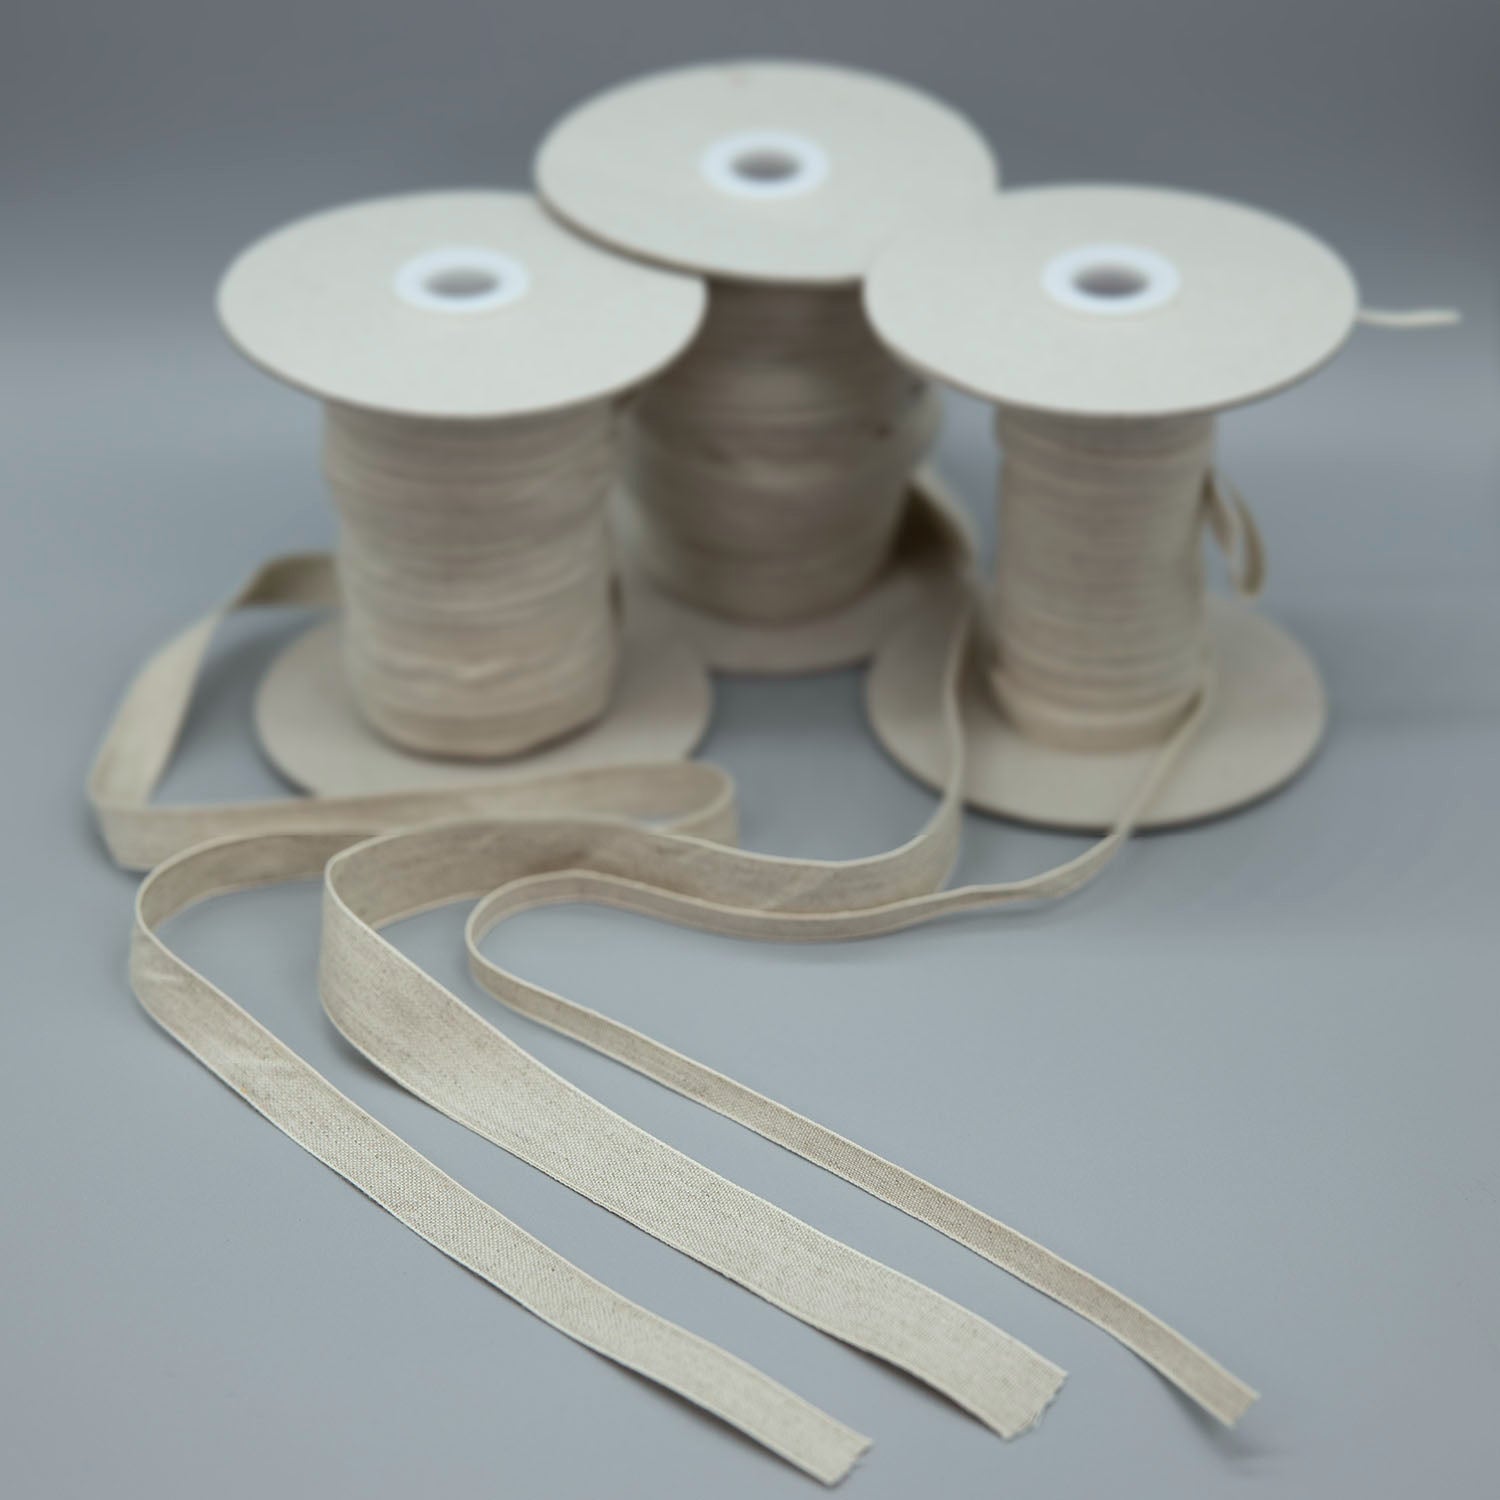 Dutch Linen Tape - Natural - Sold by the yard - $1.35 yd. - $1.70 yd.